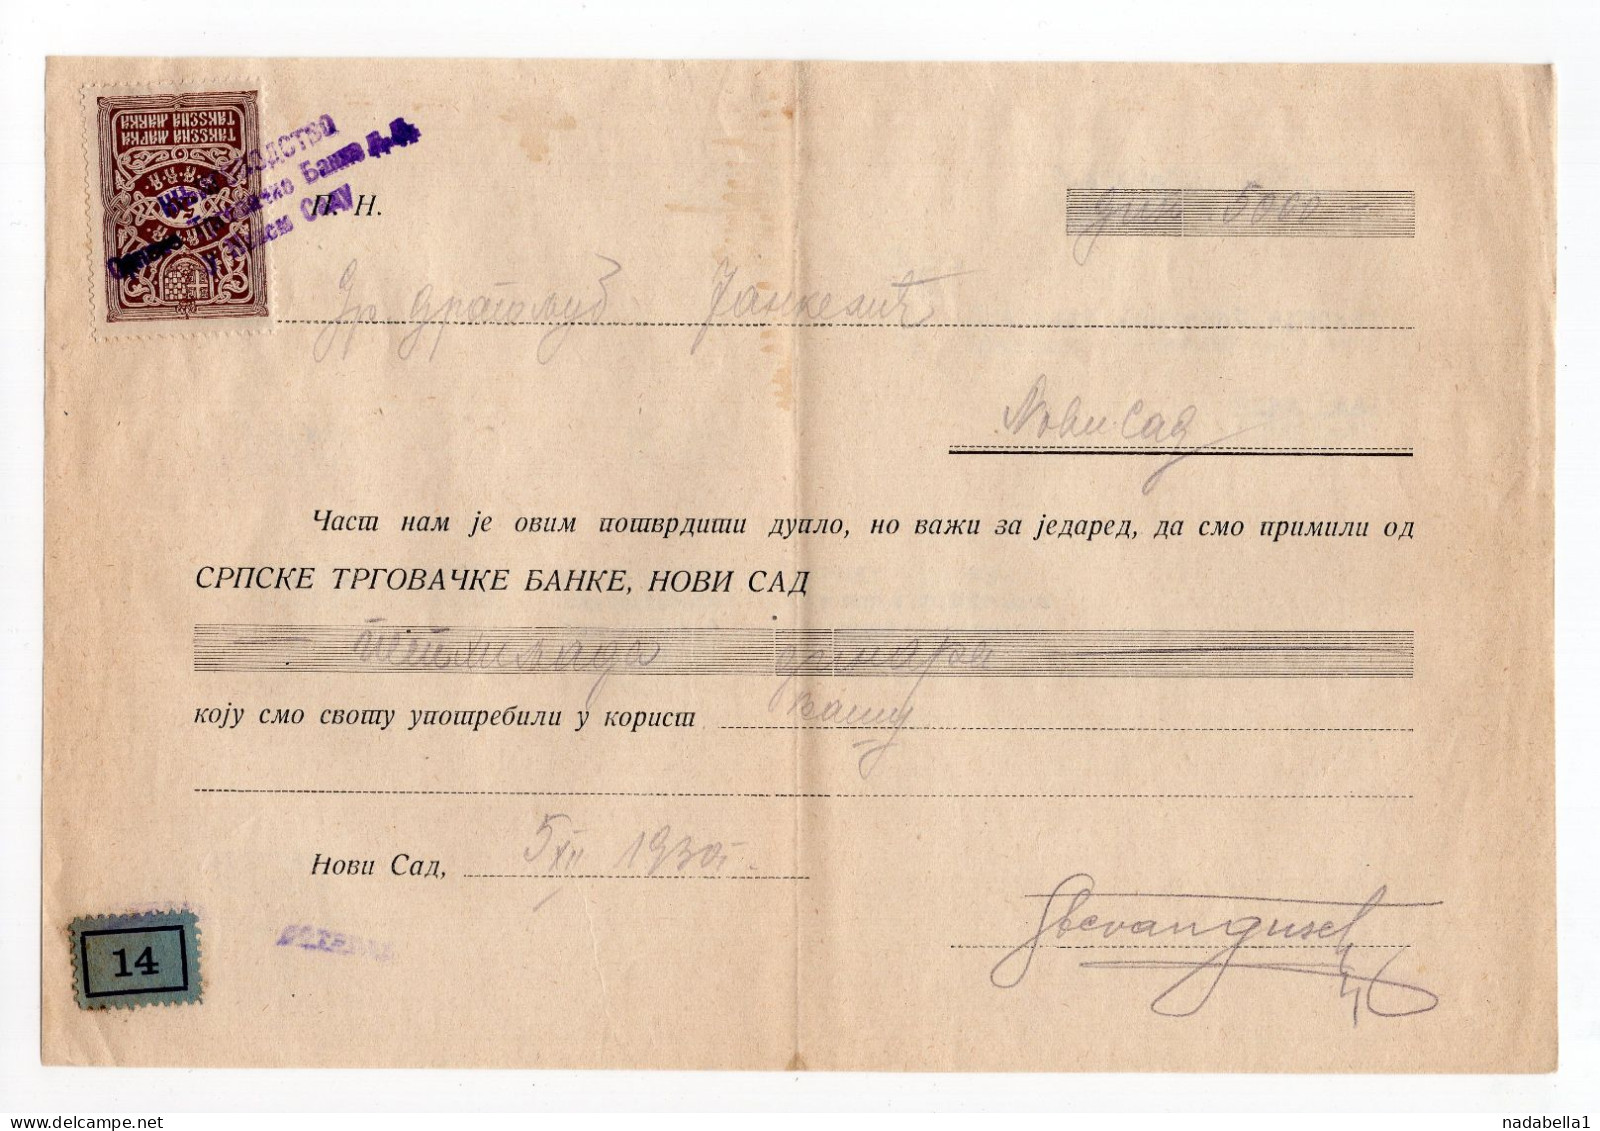 1930. KINGDOM OF SHS,SERBIA,NOVI SAD,RECEIPT FOR THE PAYMENT TO SERBIAN TRADING BANK,1 STATE REVENUE STAMP - Covers & Documents